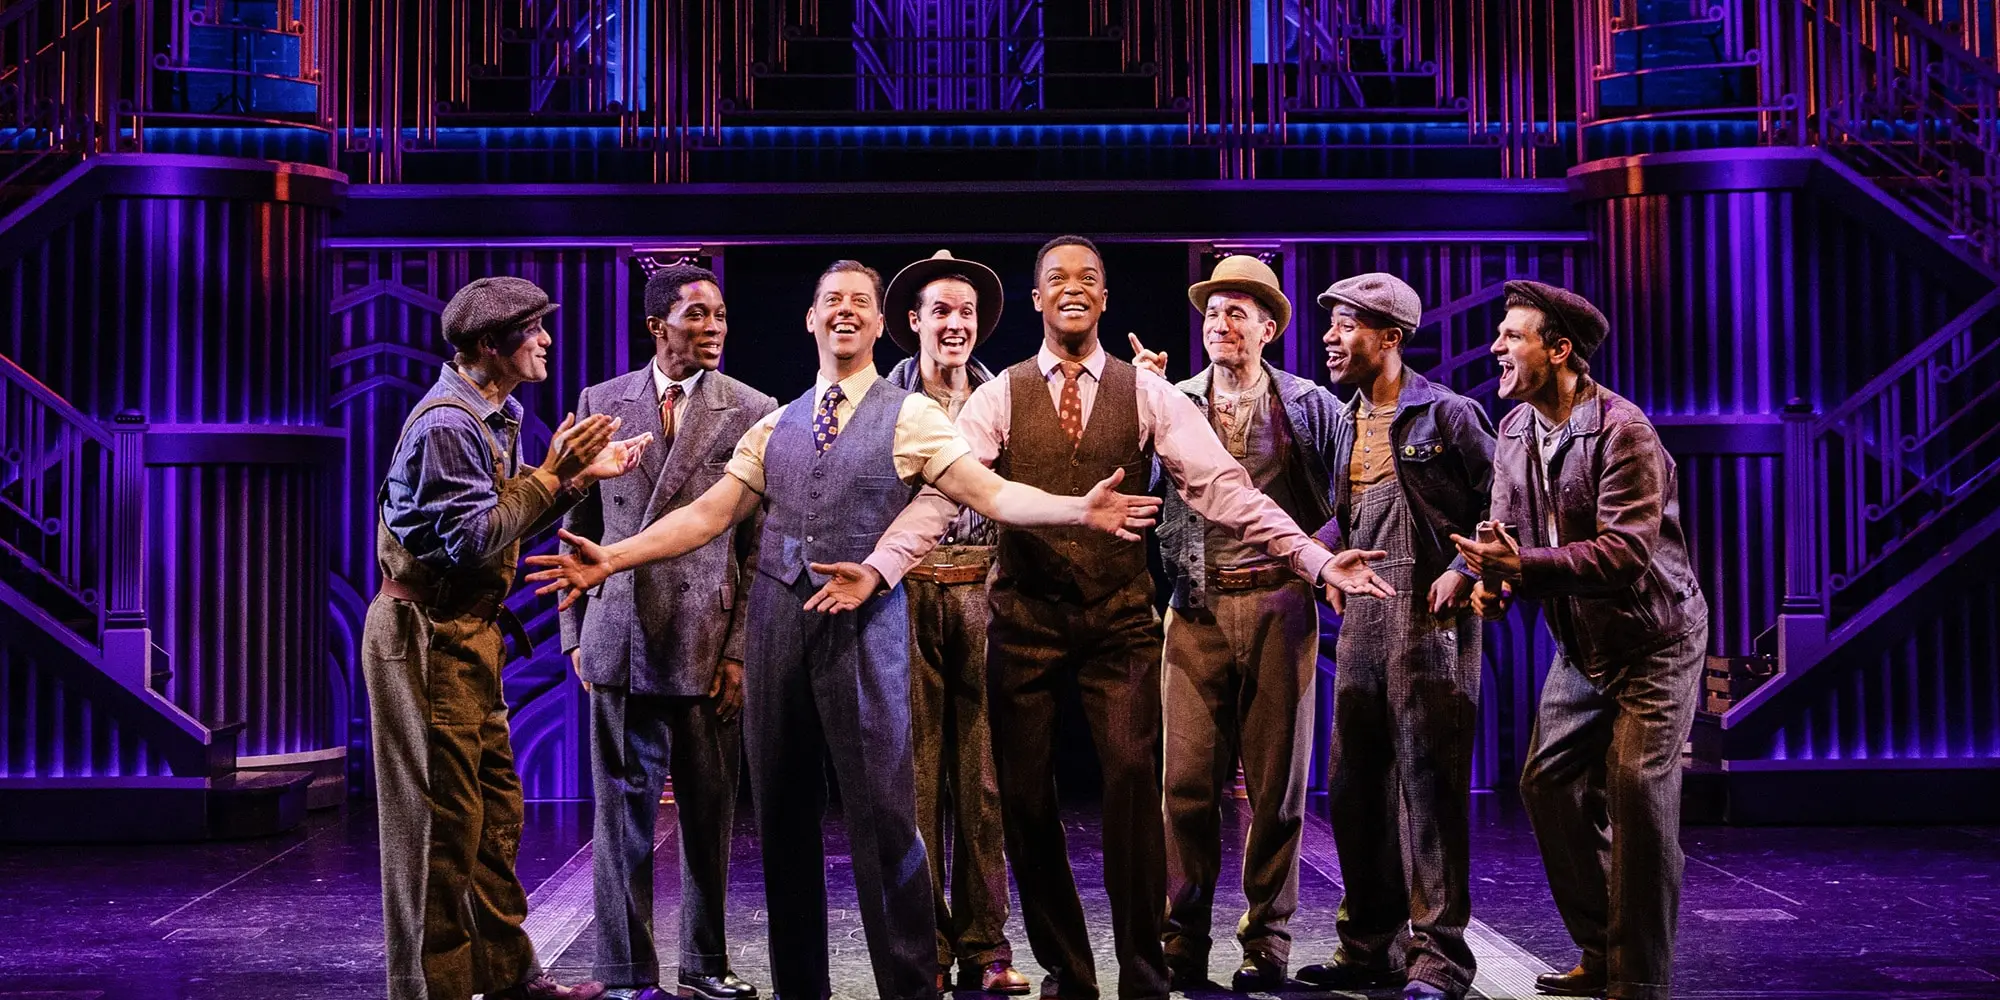 Christian Borle and J. Harrison Ghee with the cast of "Some Like It Hot". Photo credit: Marc J. Franklin